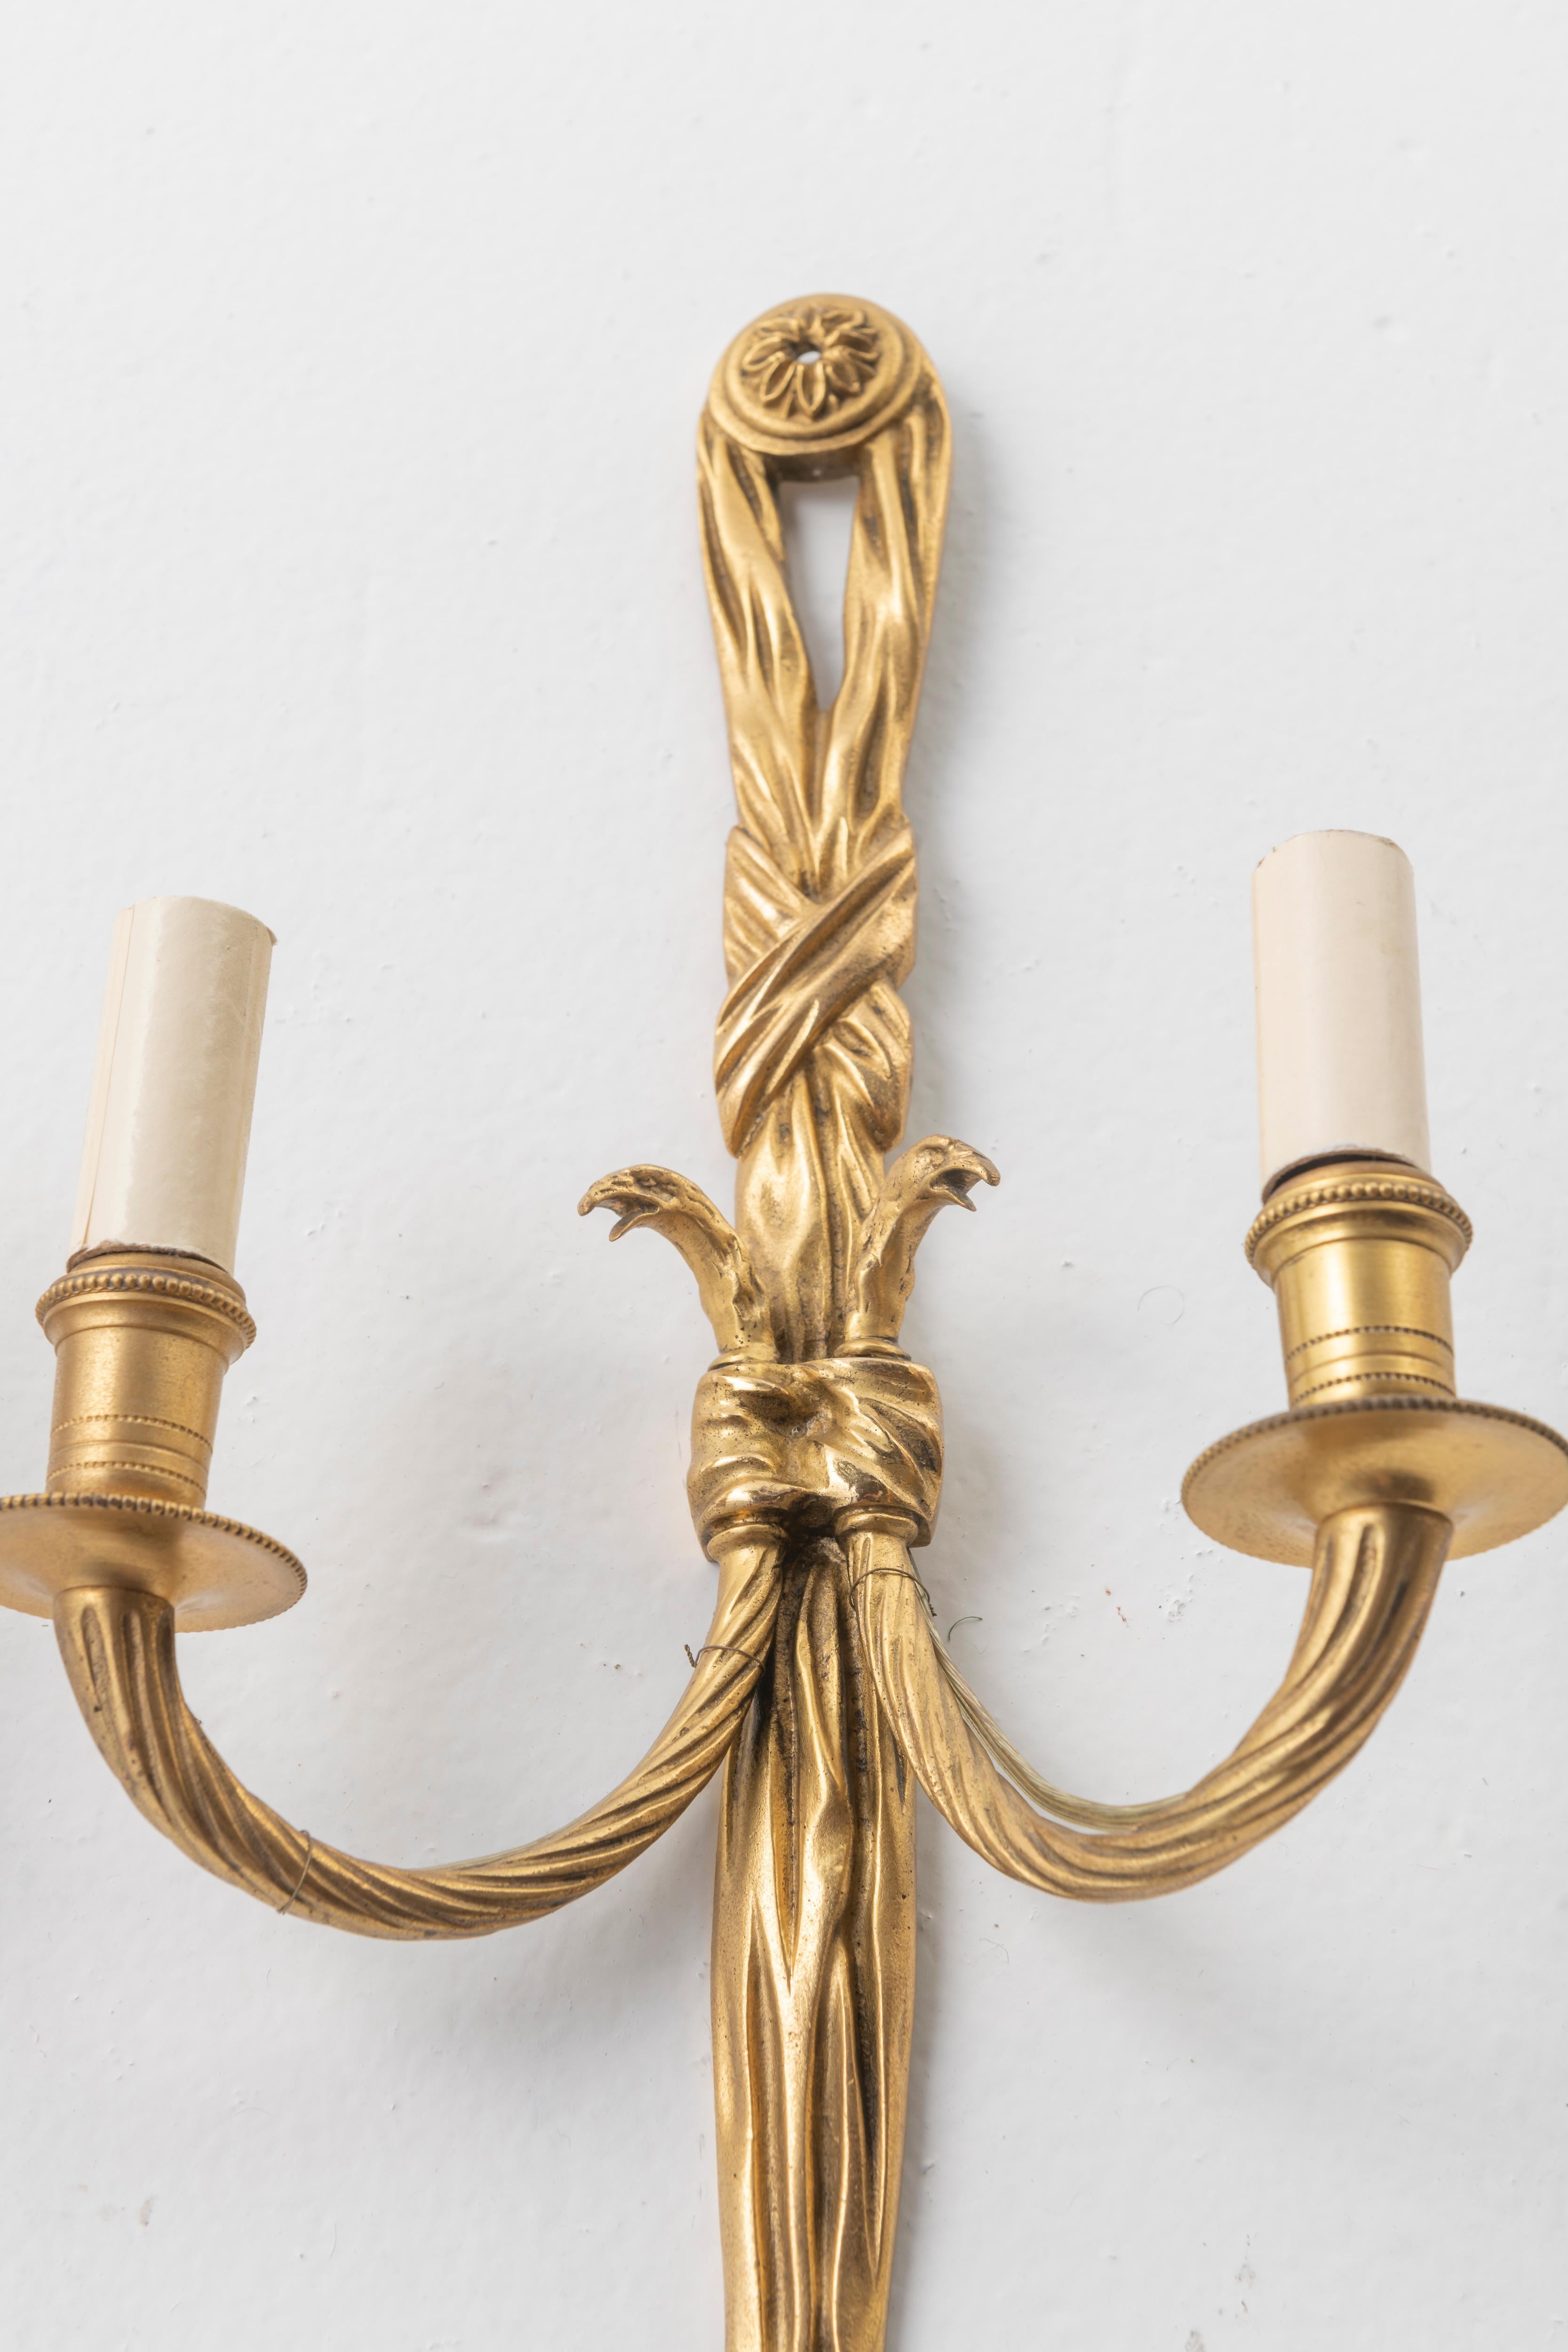 Lovely pair of gilt bronze sconces in the shape of knotted ribbons holding two candle arms, produced in 19th century France.

Each sconce features tassels, draped over buttons, decorated with rosettes. The neoclassical elements, typical of the